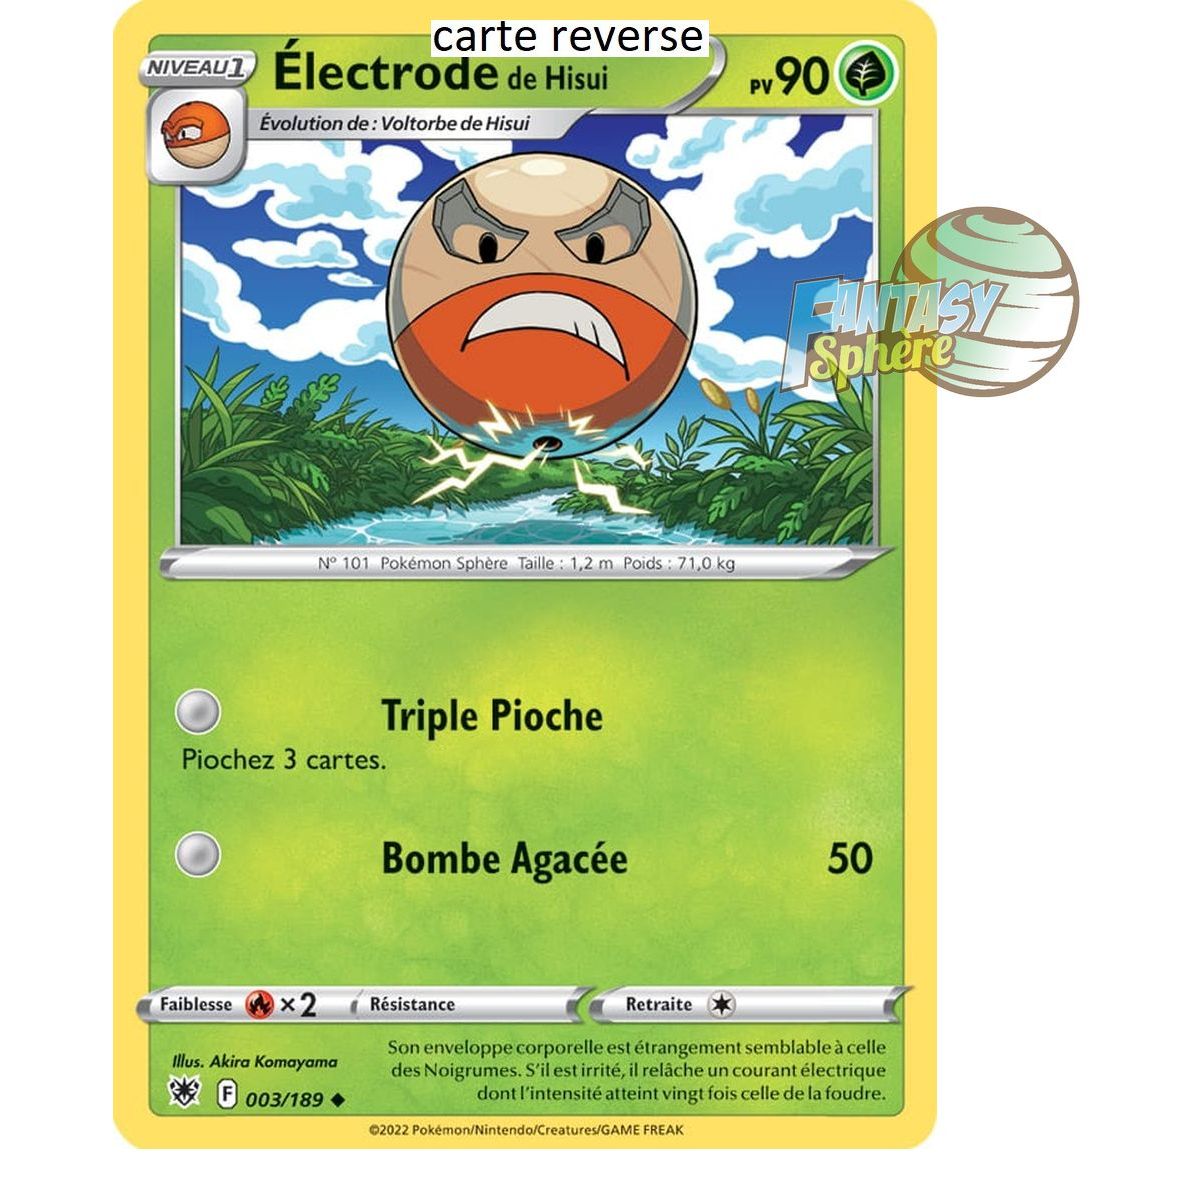 Hisui's Electrode - Reverse 3/189 - Sword and Shield 10 Radiant Stars